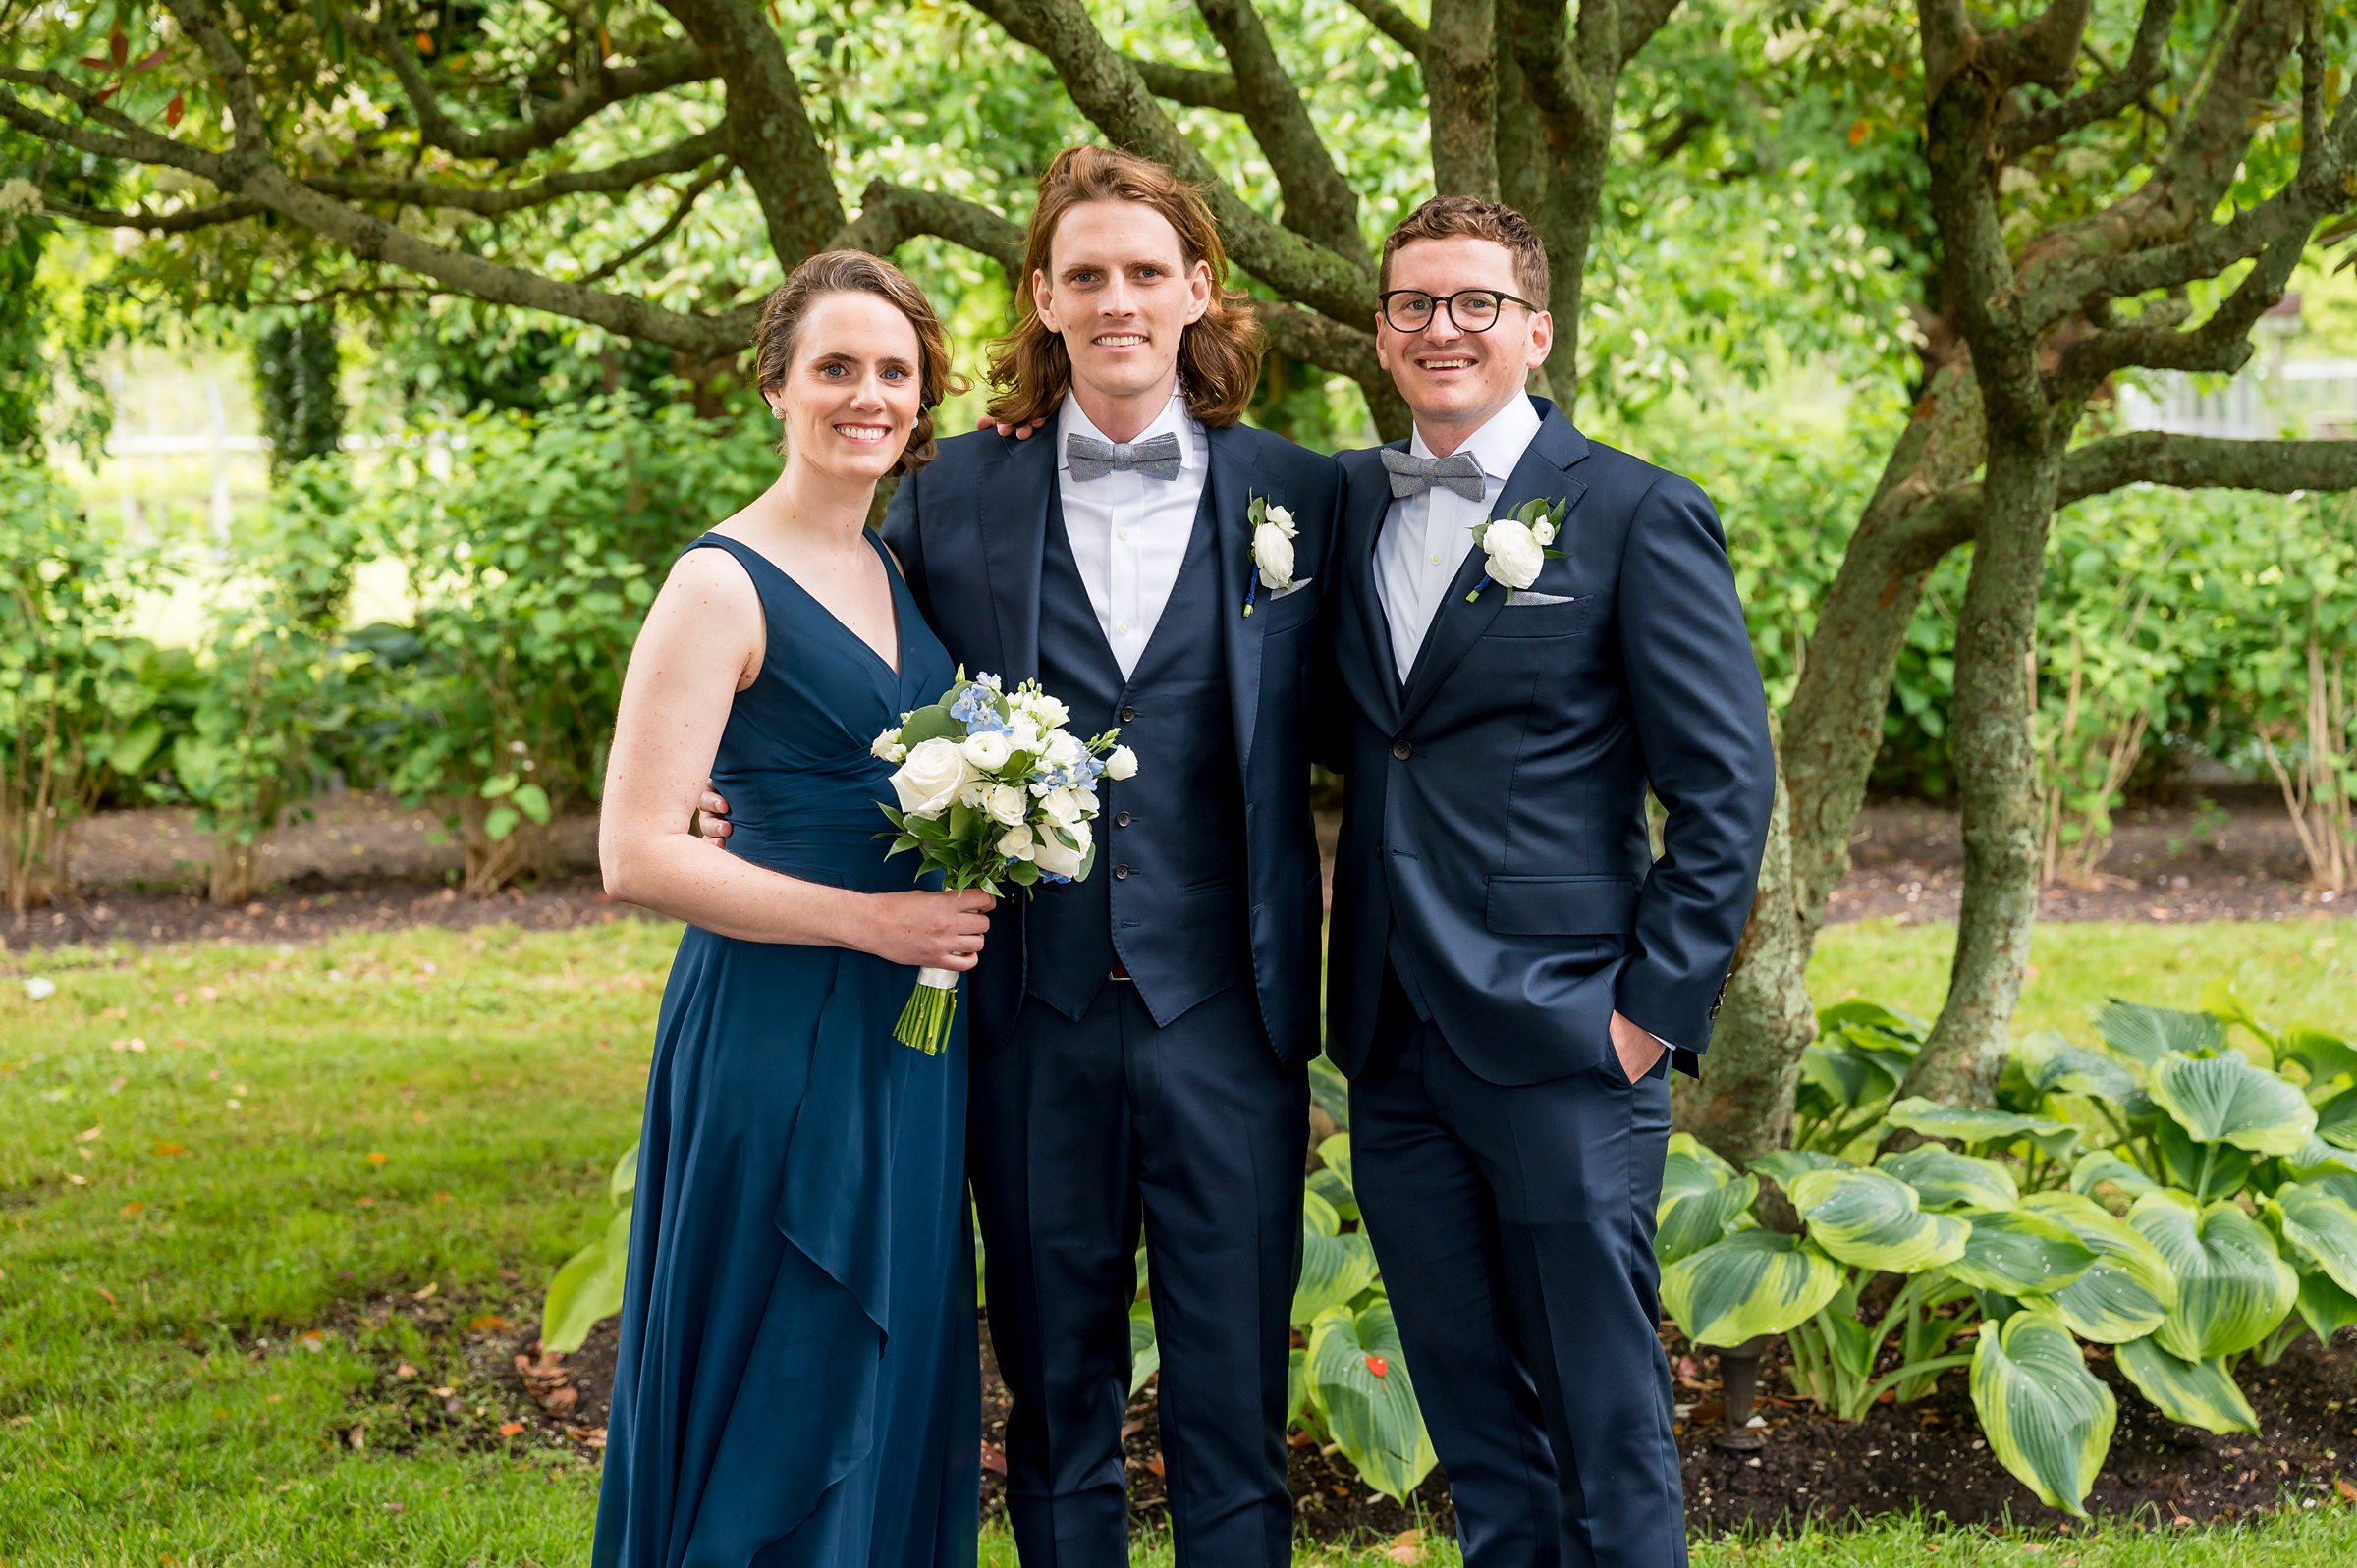 Three people dressed formally stand together outdoors, with two men in tuxedos and a woman in a navy dress holding a bouquet. Trees and greenery form the background.